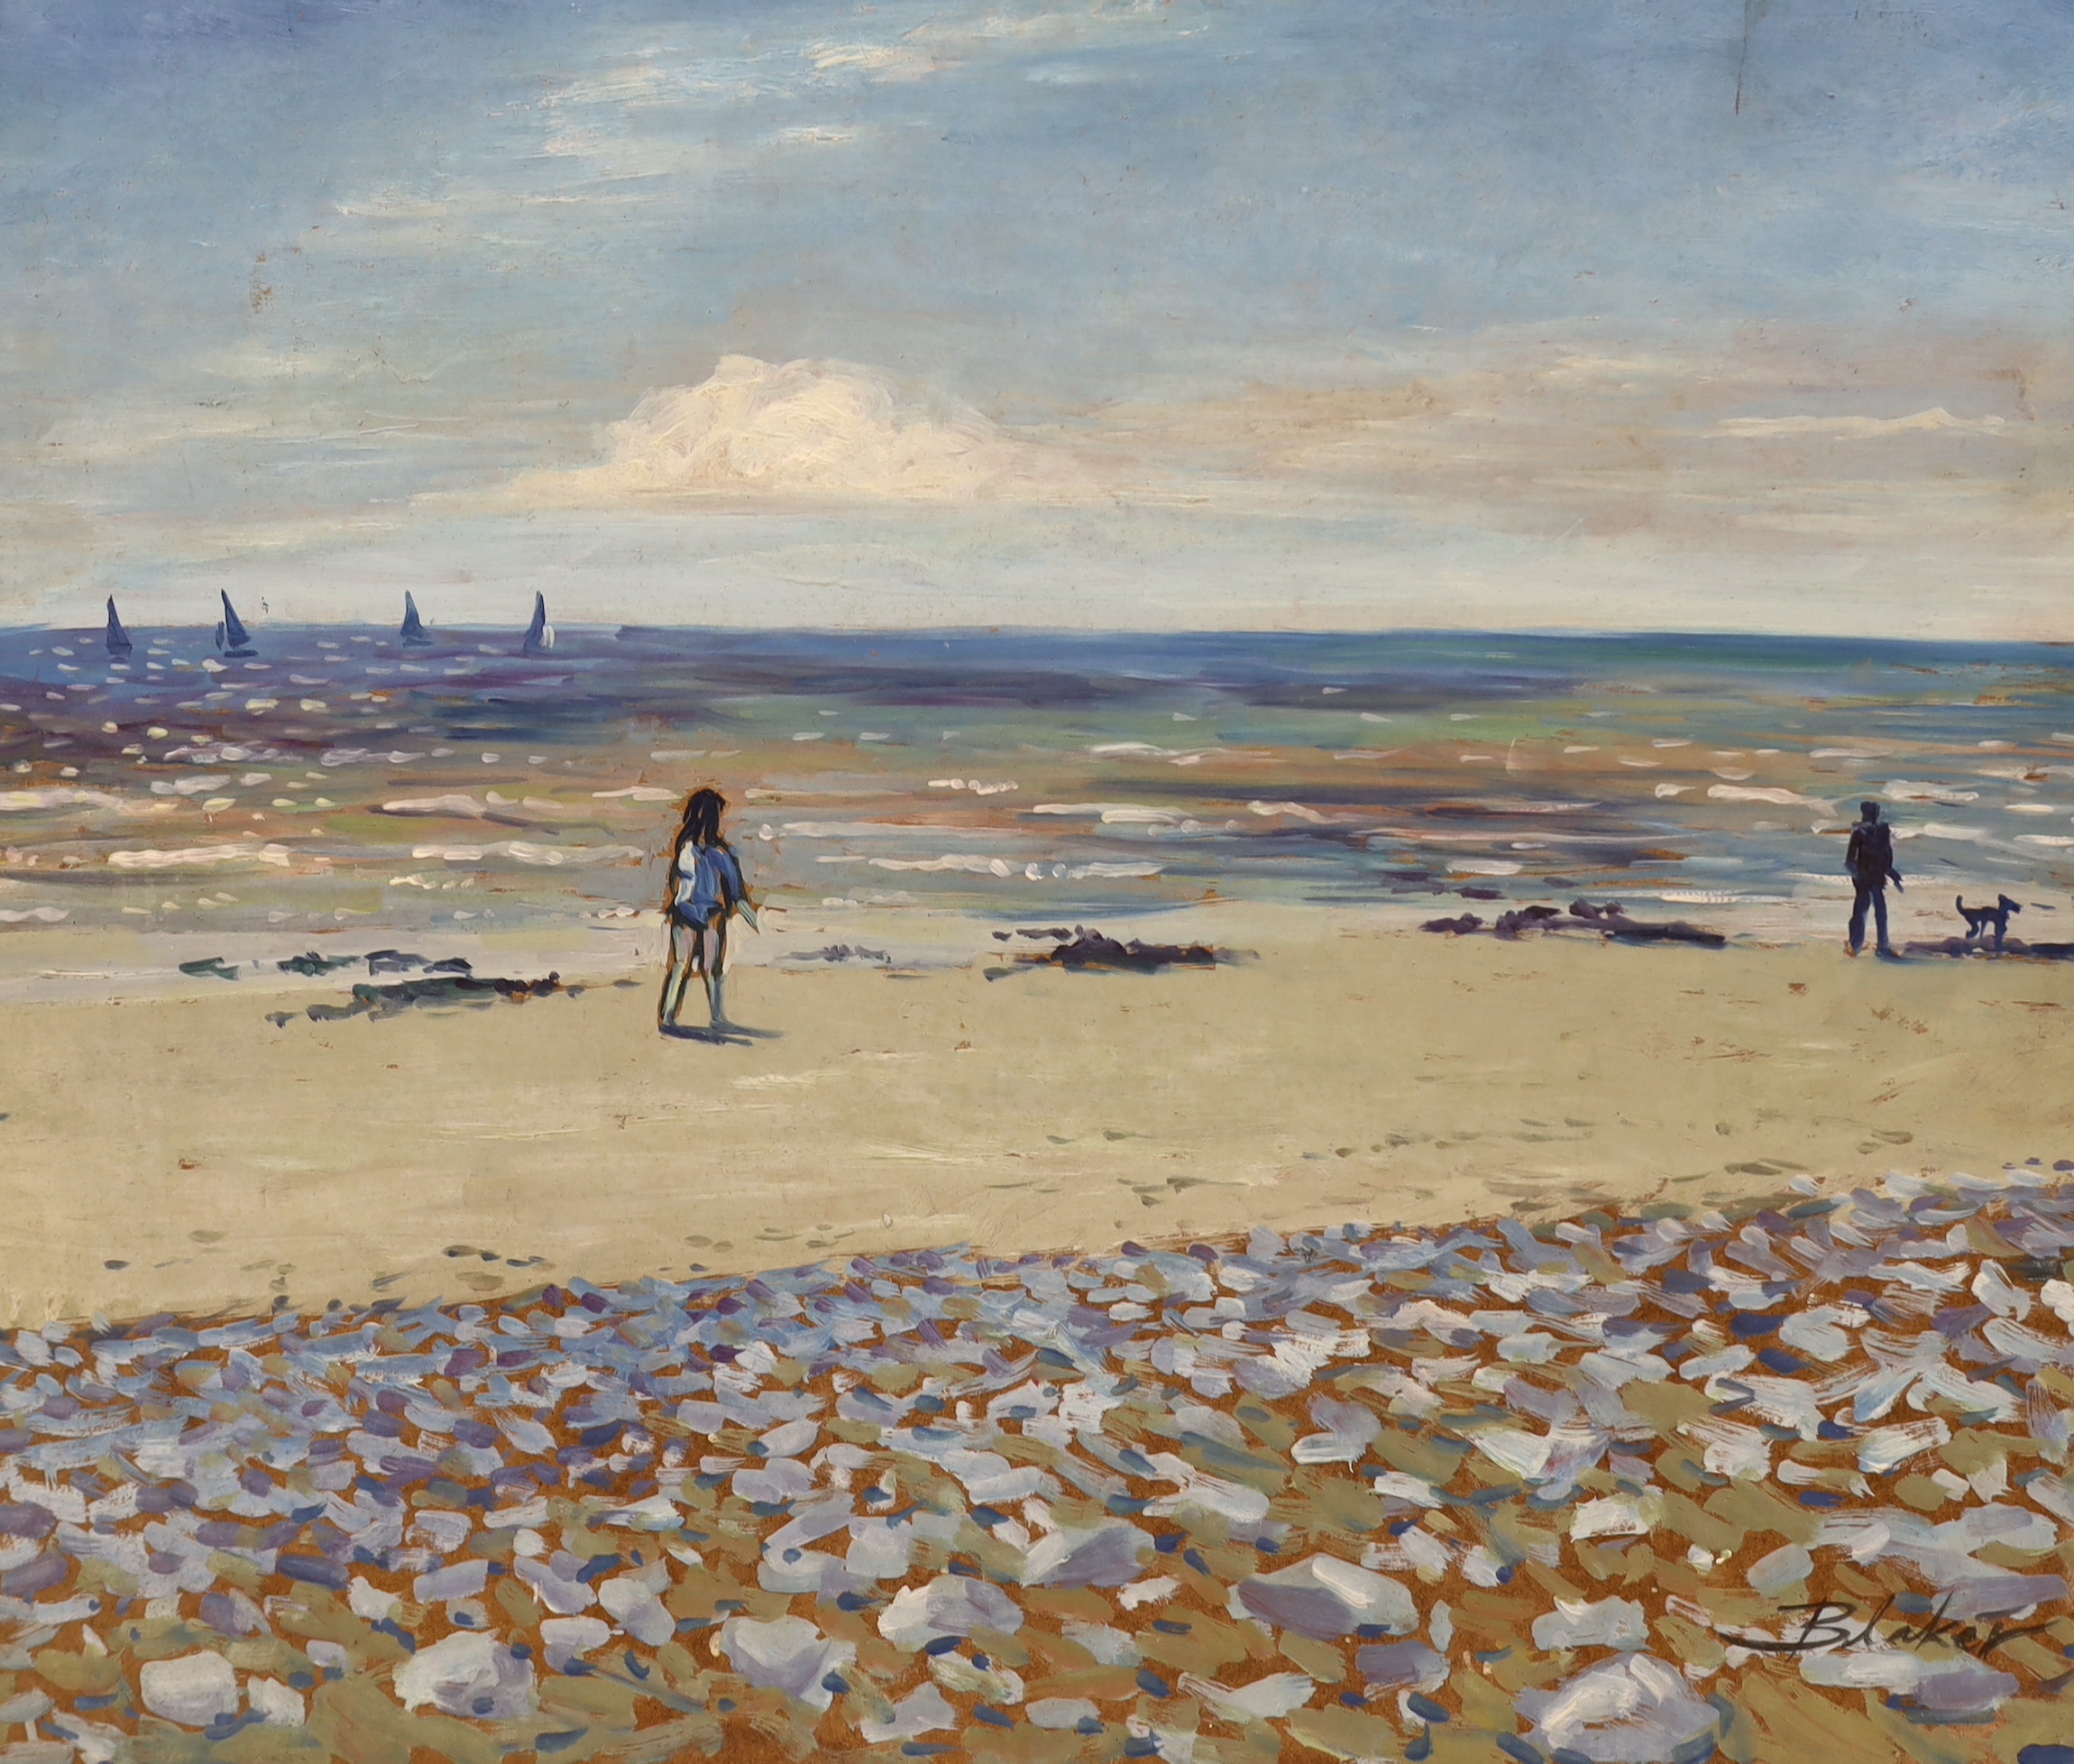 Michael John Blaker (1928-2018), two oils on board, view from Hove towards Southwick and Shoreham and Sussex beach with walkers, signed, largest 51 x 61cm, unframed